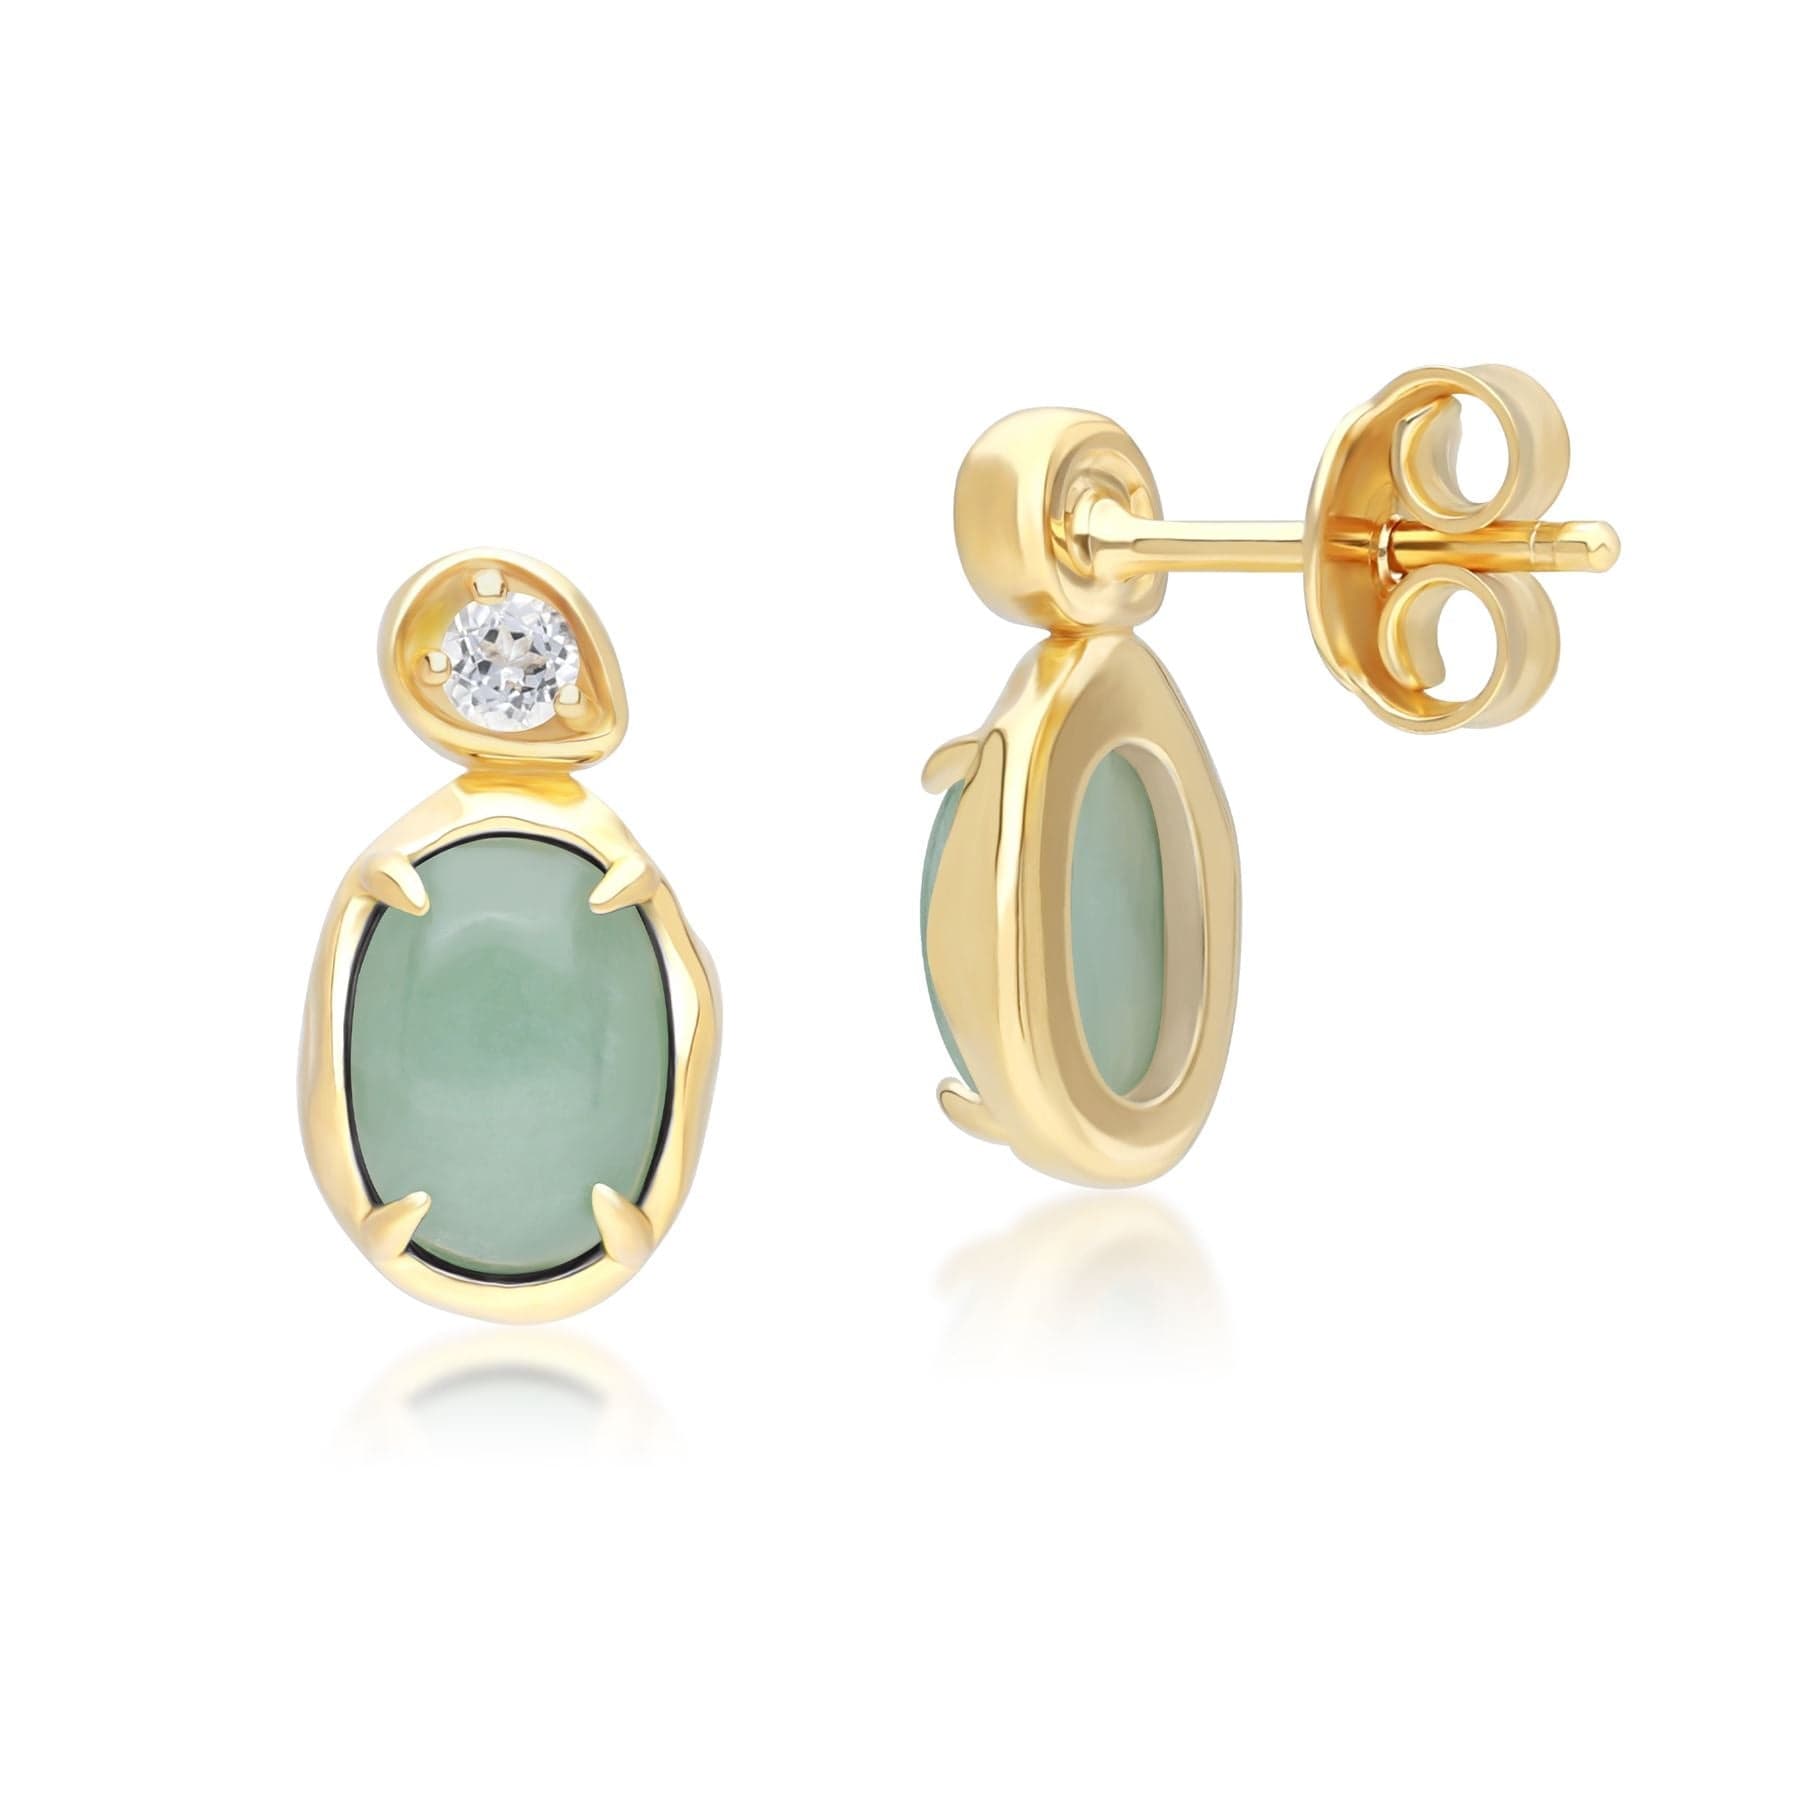 Irregular Oval Dyed Green Jade & Topaz Drop Earrings In 18ct Gold Plated SterlIng Silver